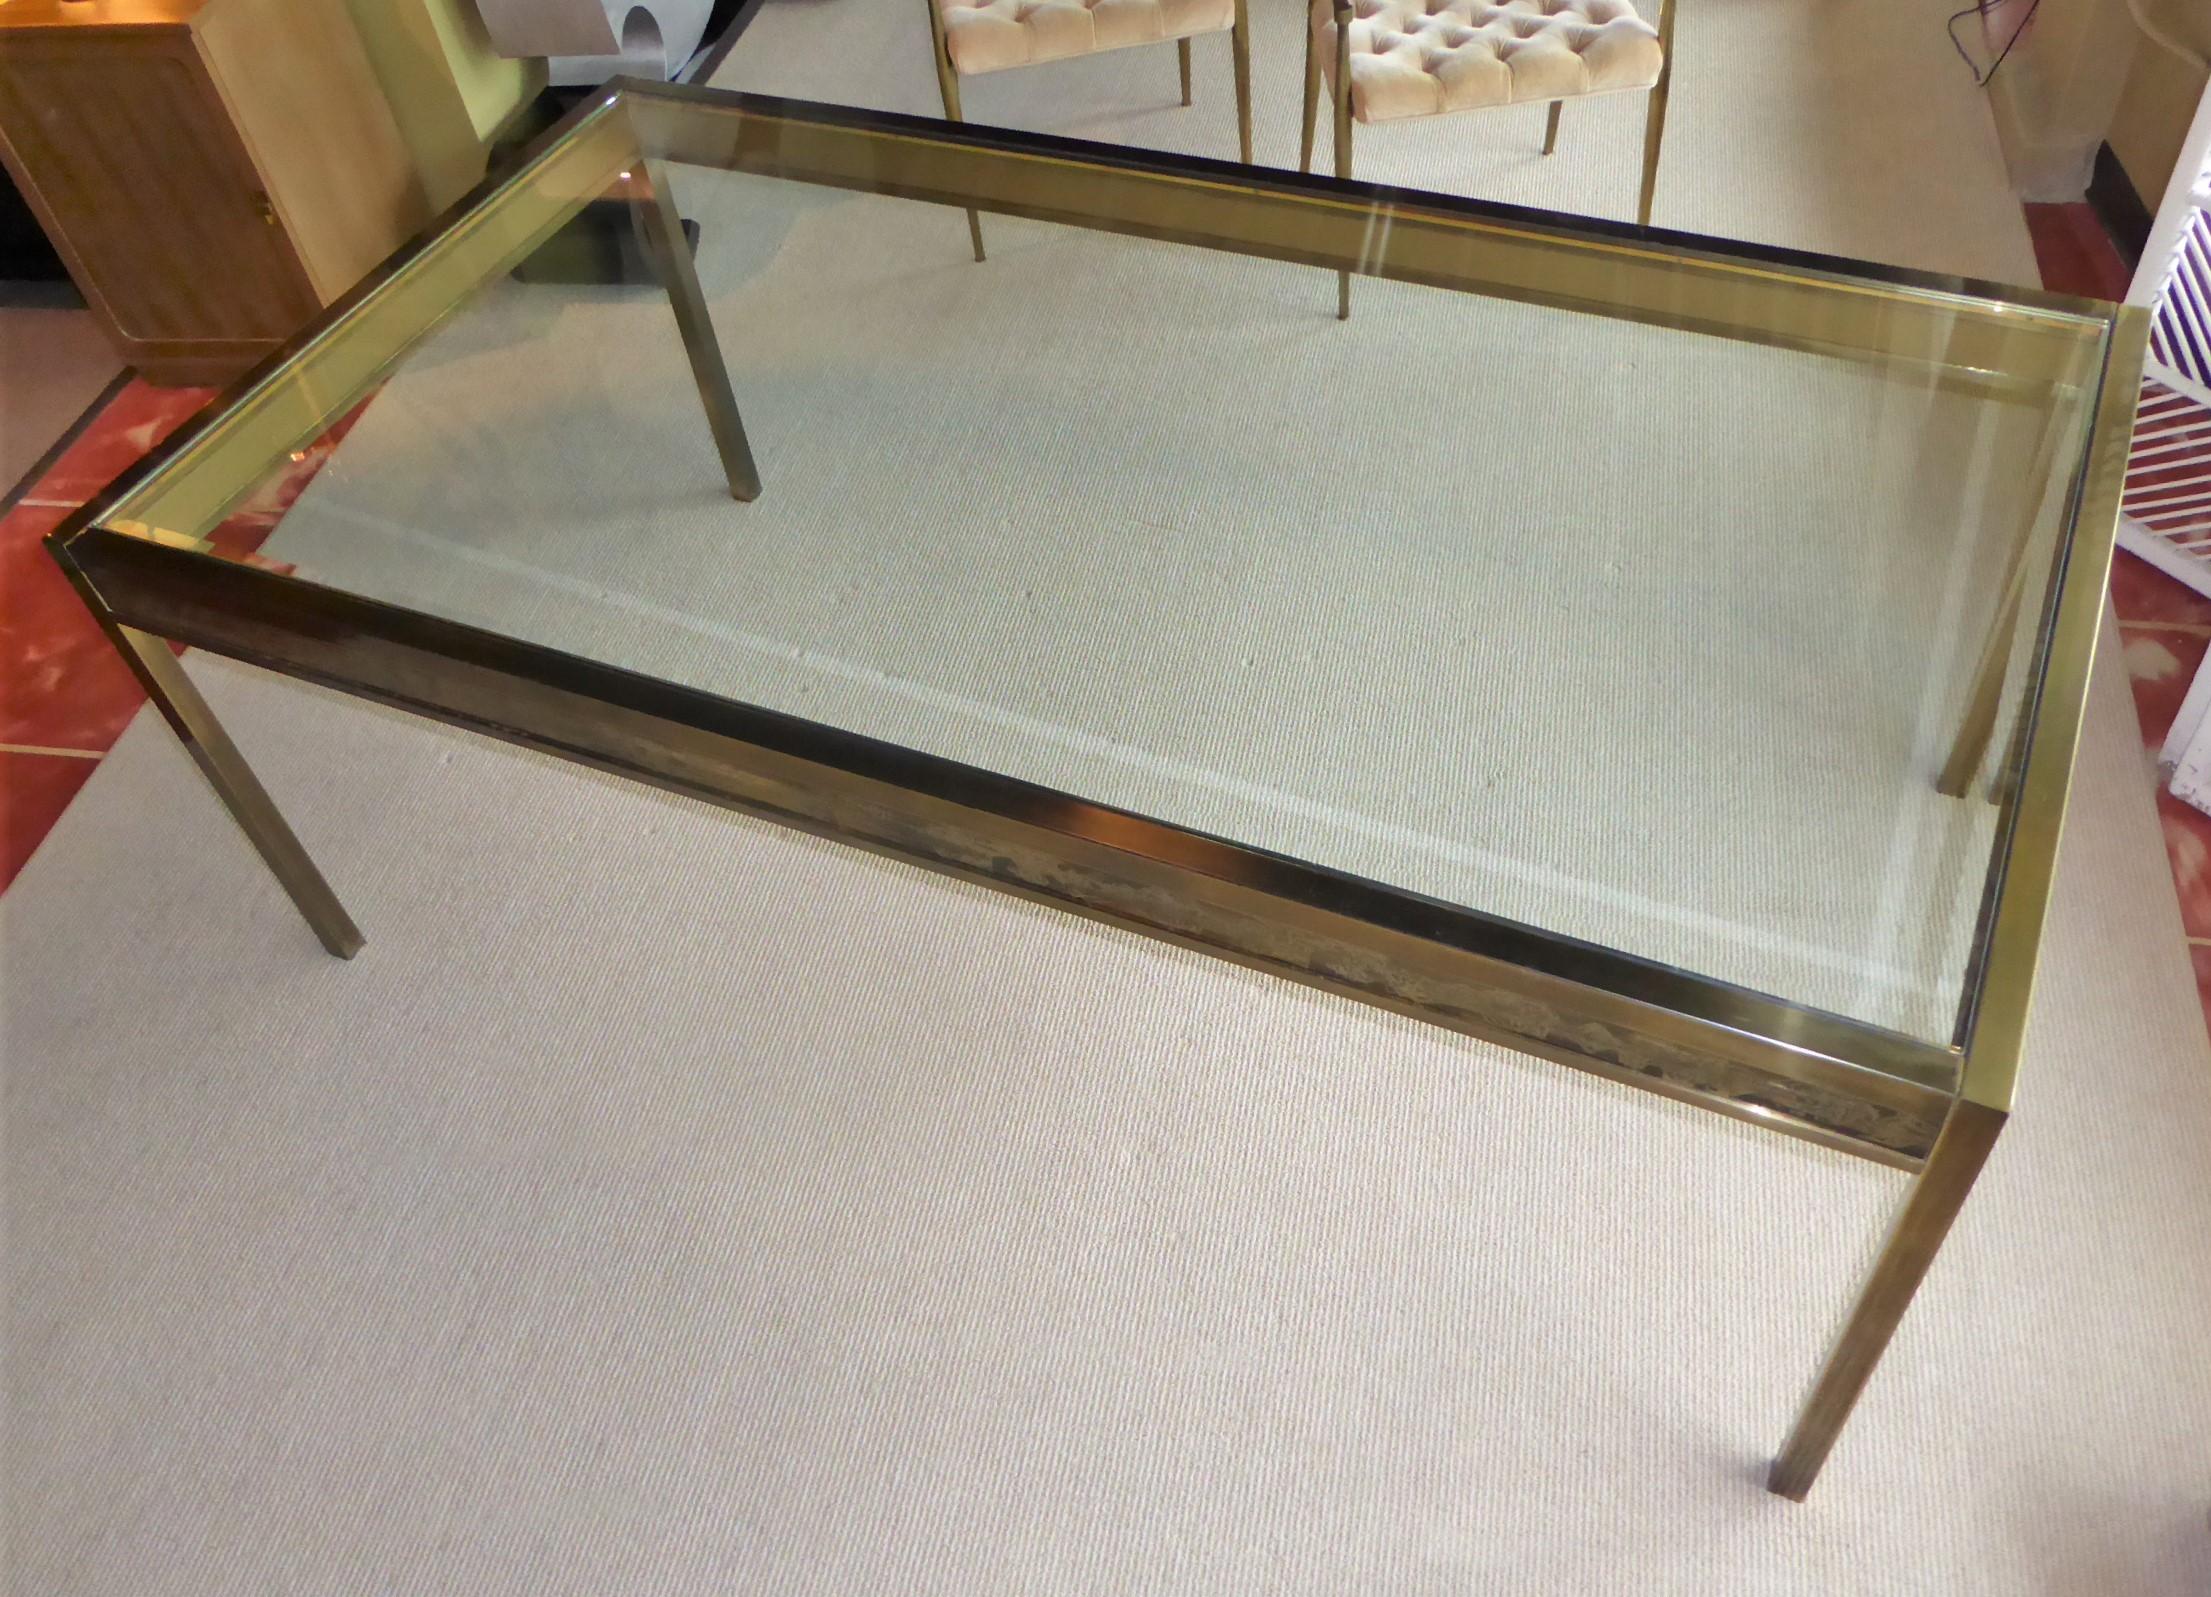 Large Mastercraft Brass and Glass Dining Table with panels by Bernhard Rohne.  Antique brass frame with acid etched decorated panels on its apron and an inset thick beveled glass top.  The brass is beautifully patinated although it has some age